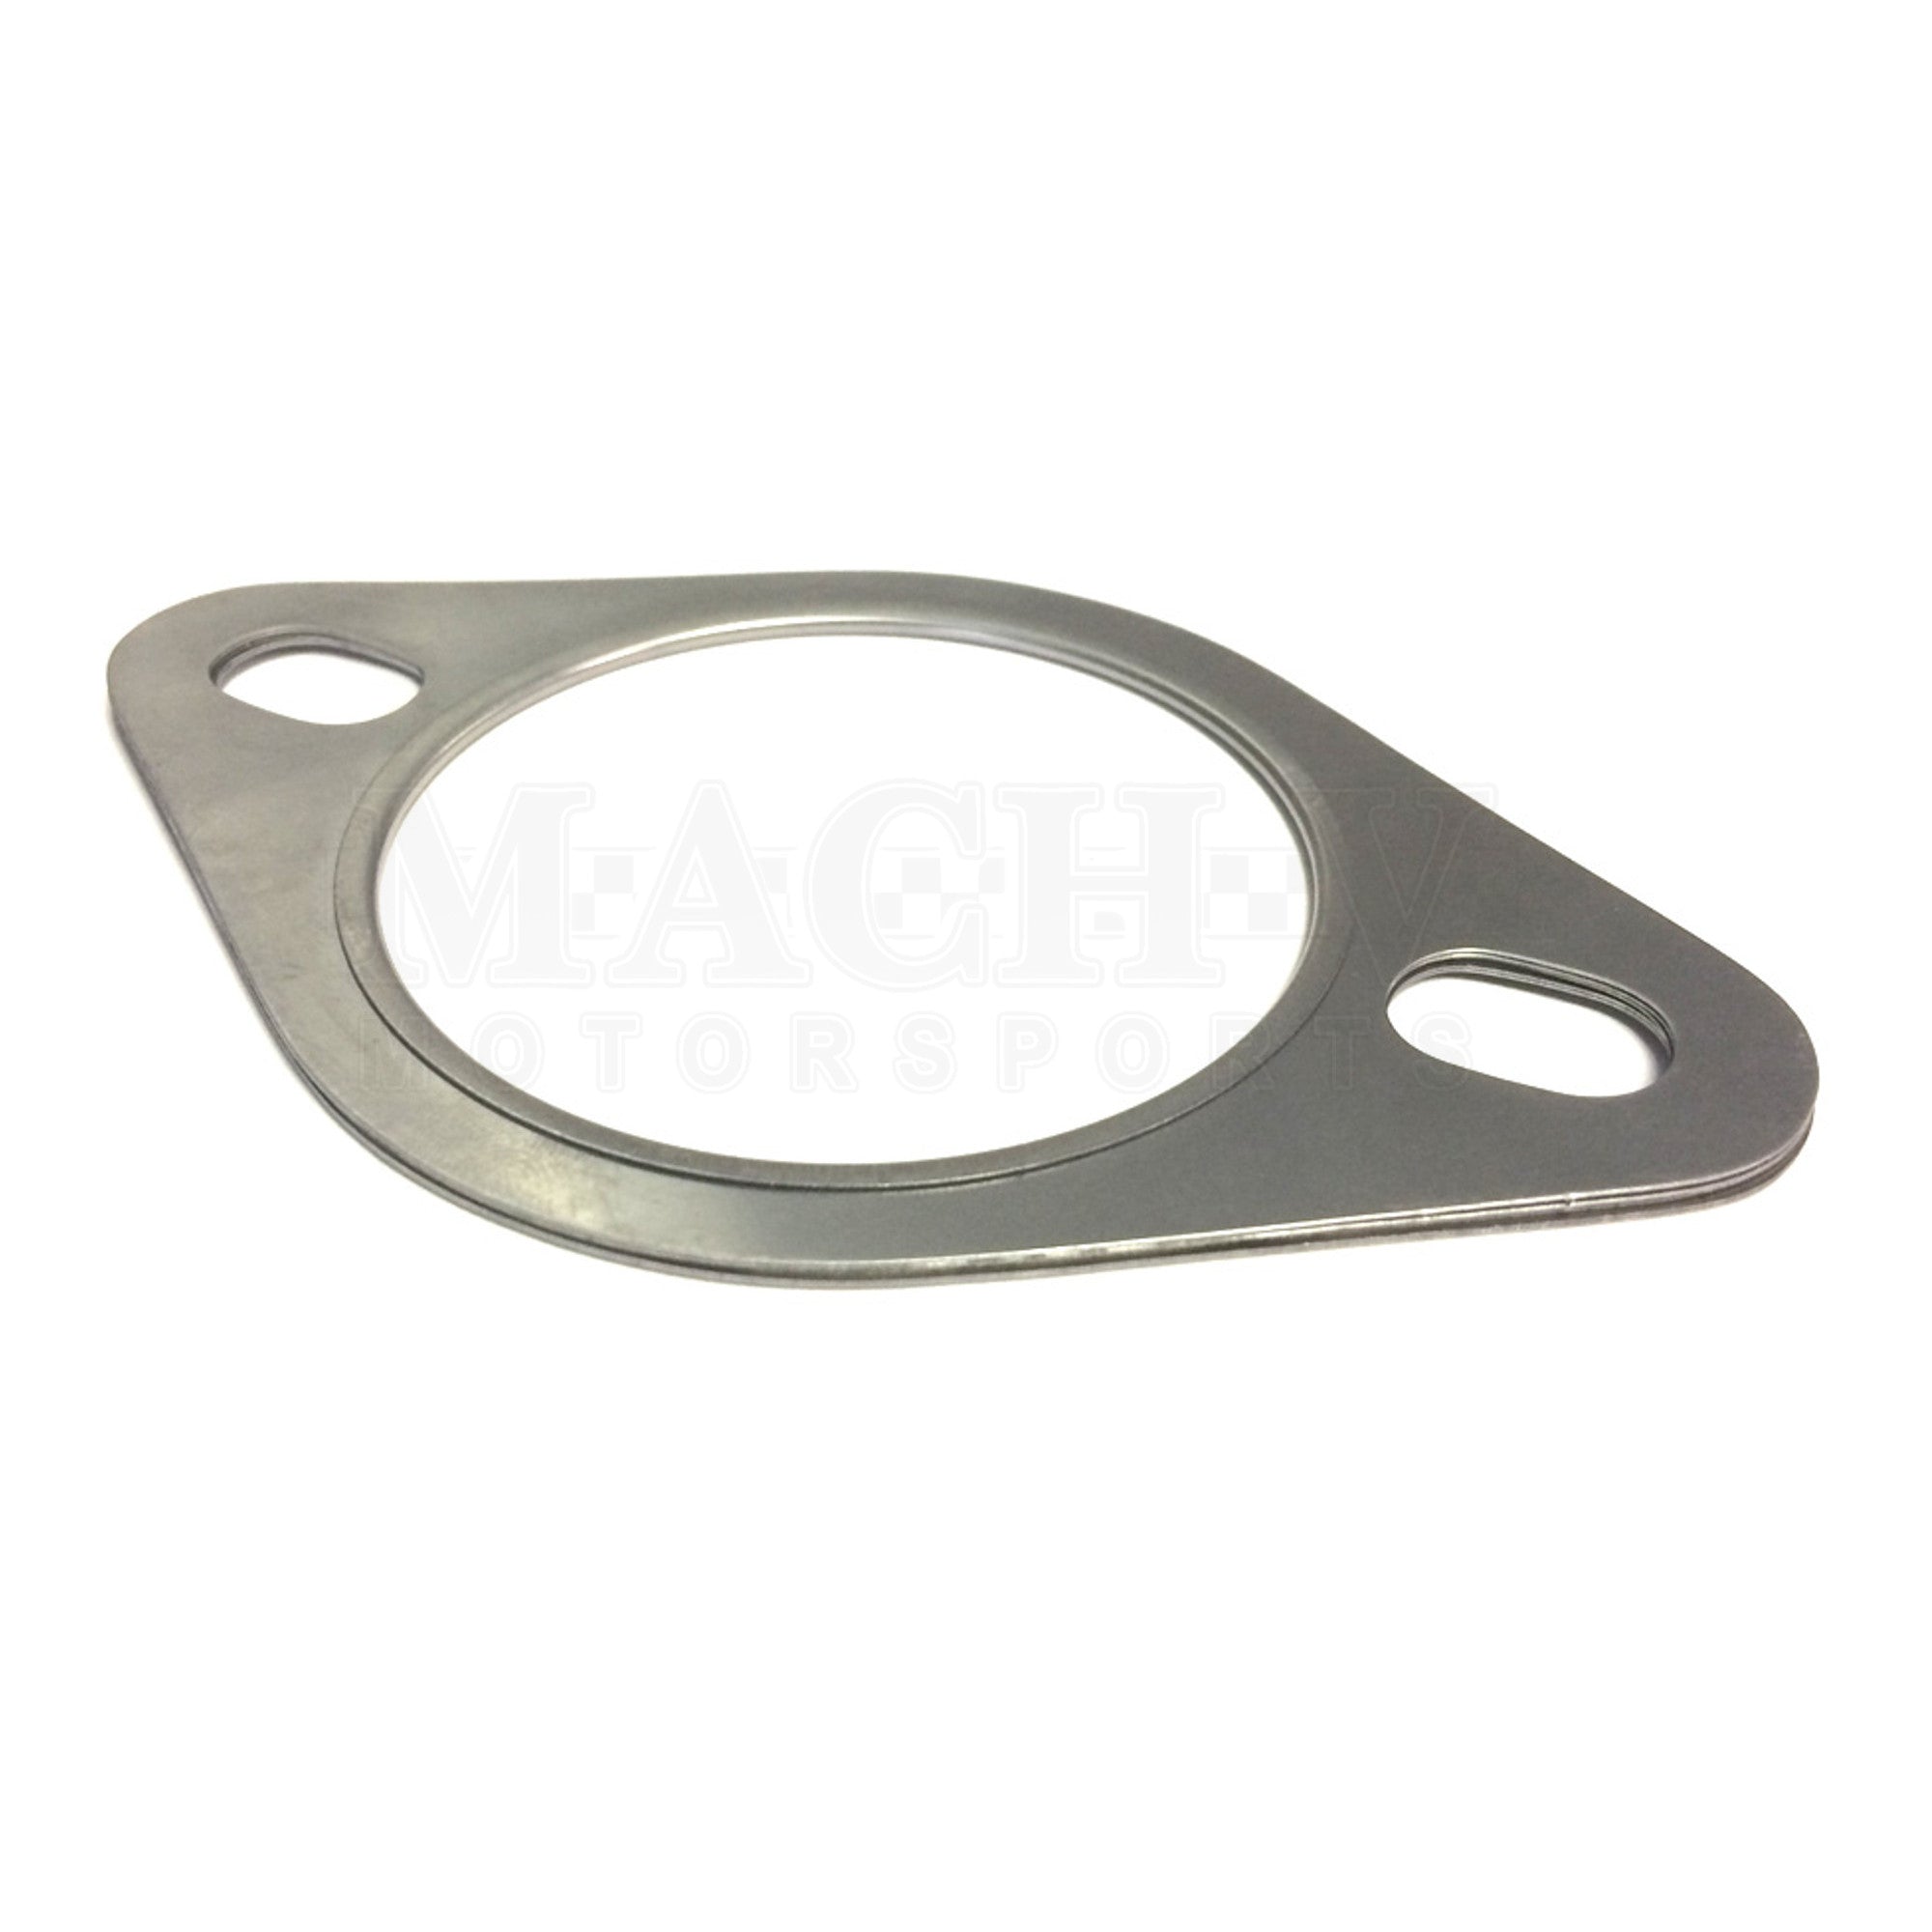 Grimmspeed Reinforced 2.25/2.5-Inch 2-Hole Exhaust Gasket